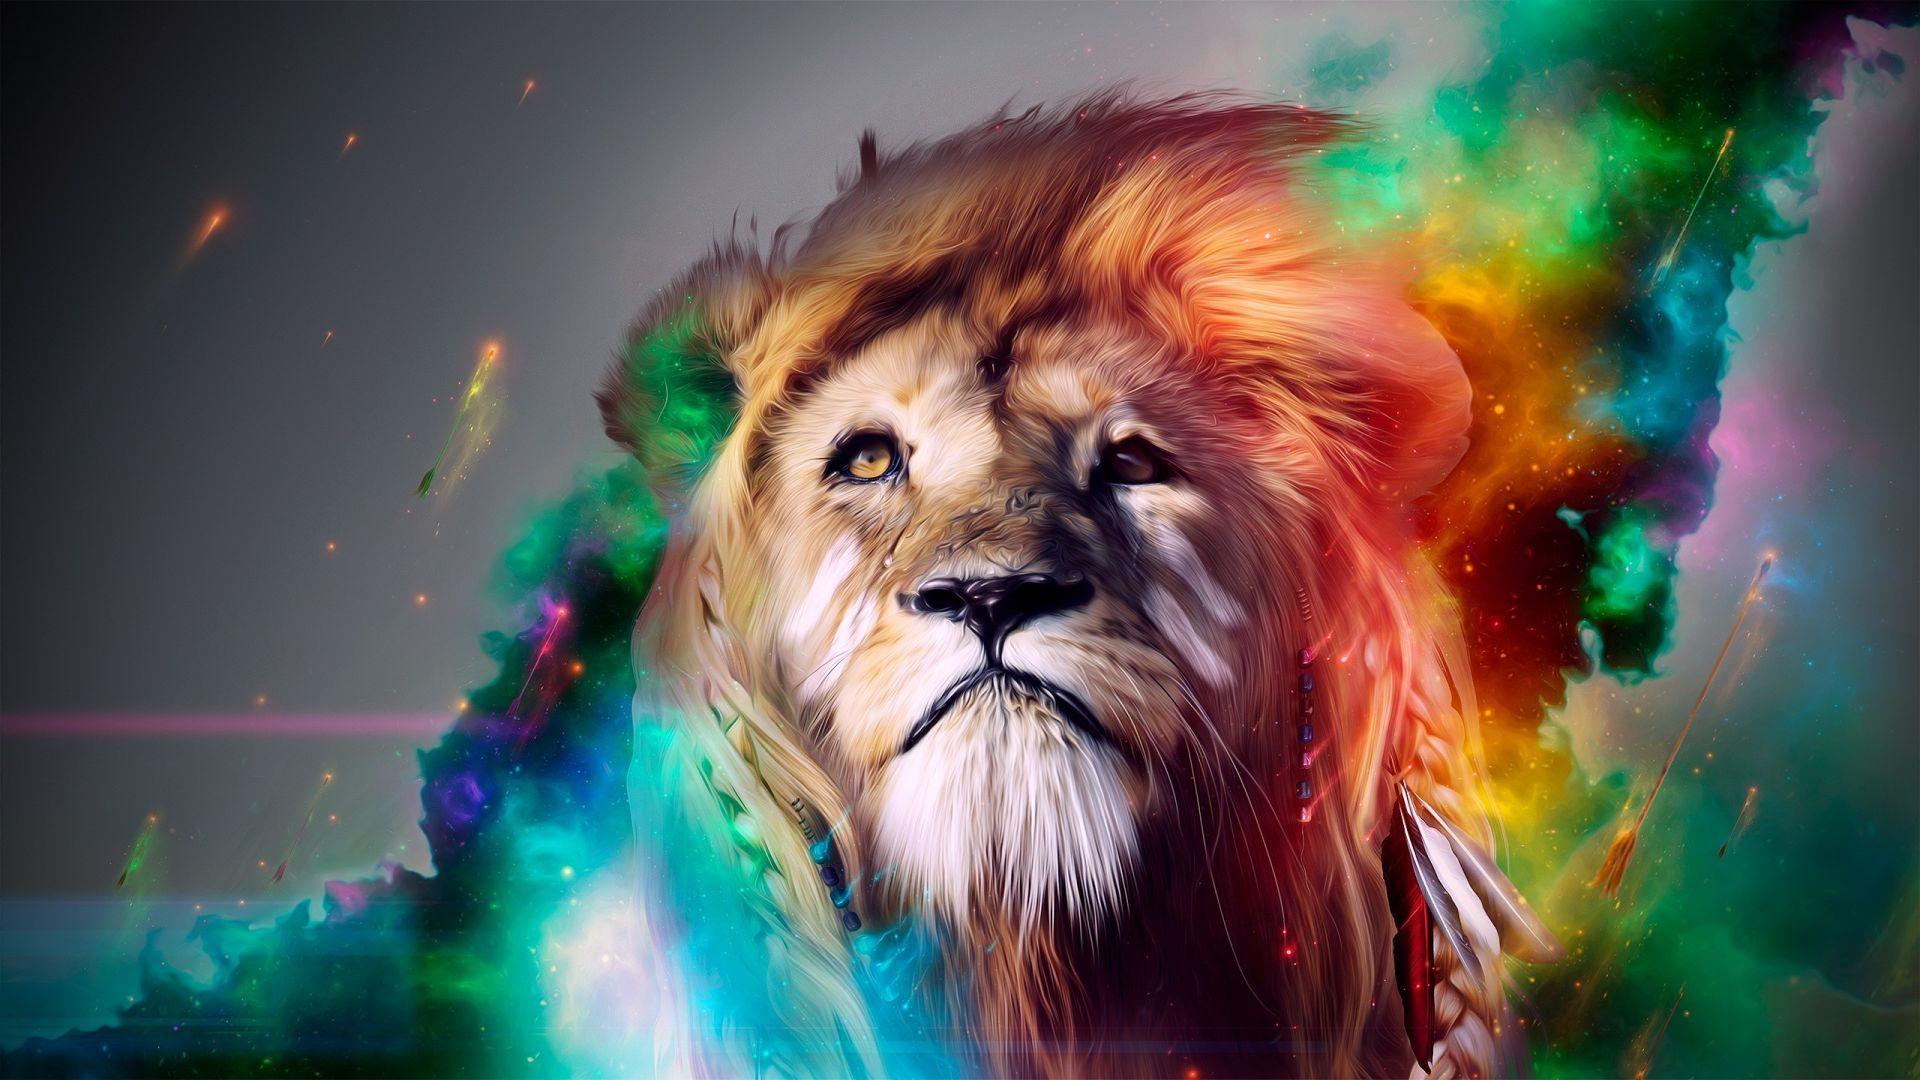 3D Abstract Fantasy Lion Wallpaper. HD 3D and Abstract Wallpaper